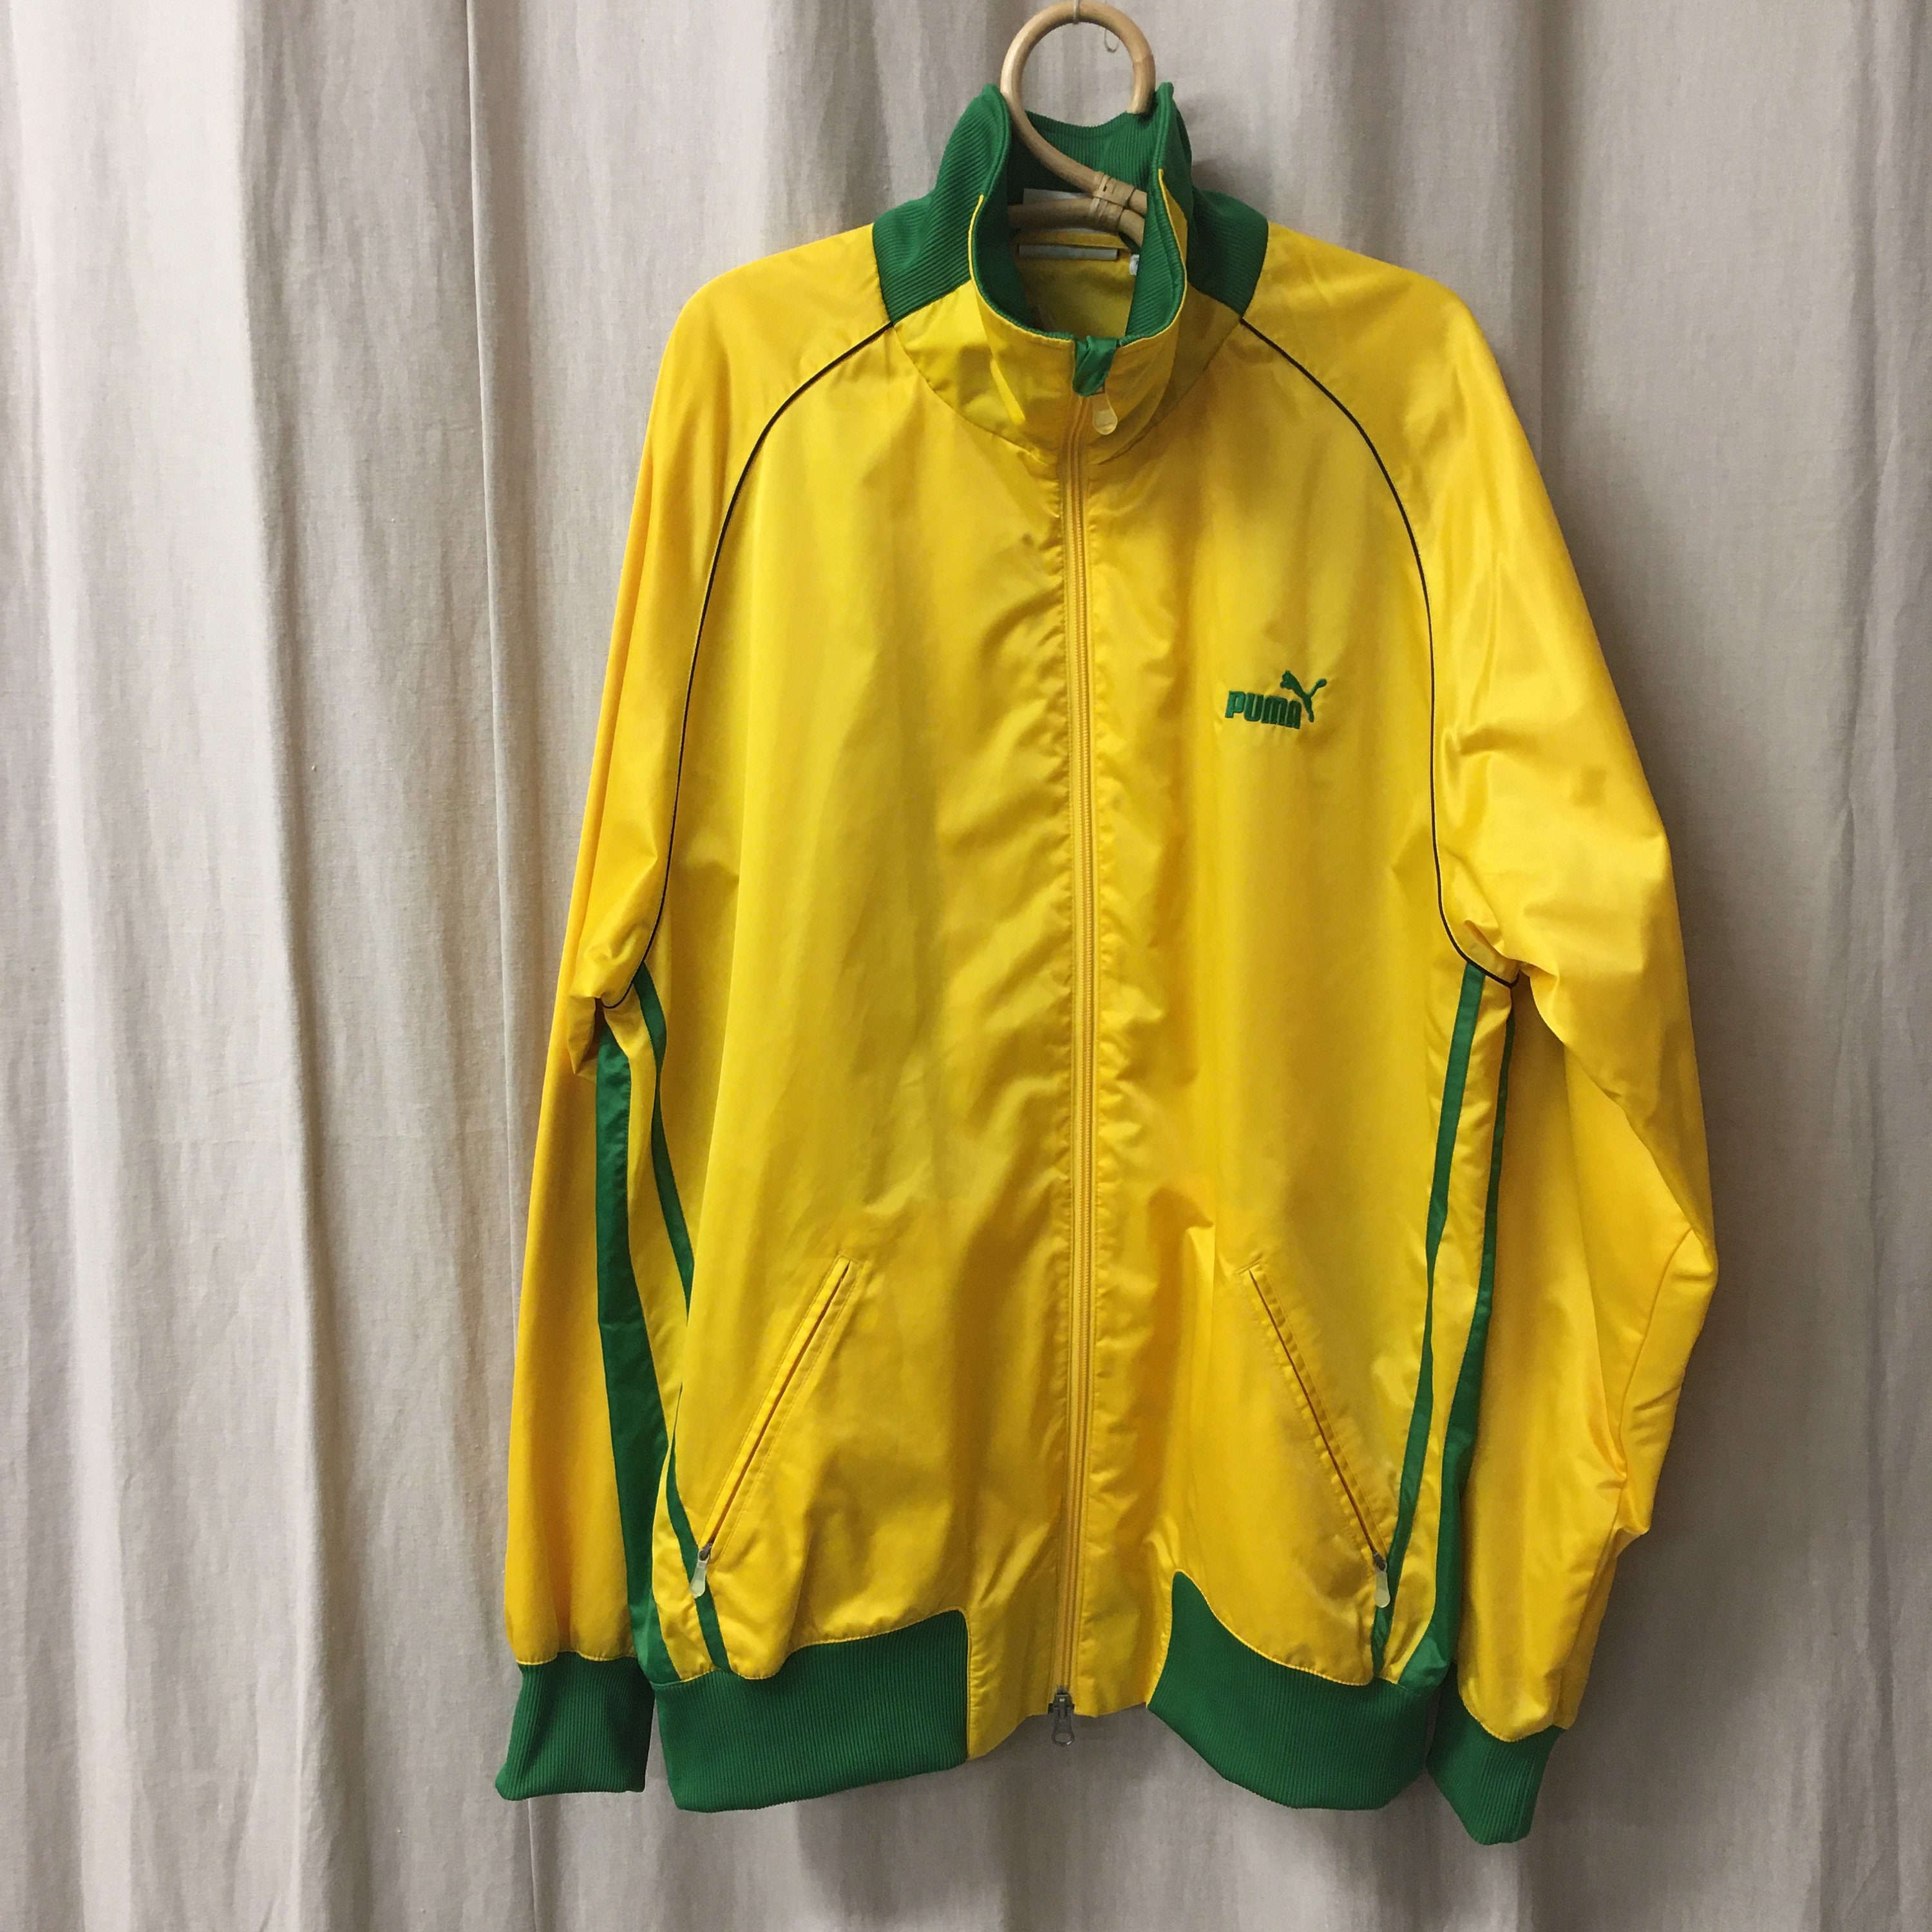 Official Jamaica Team Nylon Track Jacket Embroidered - Etsy